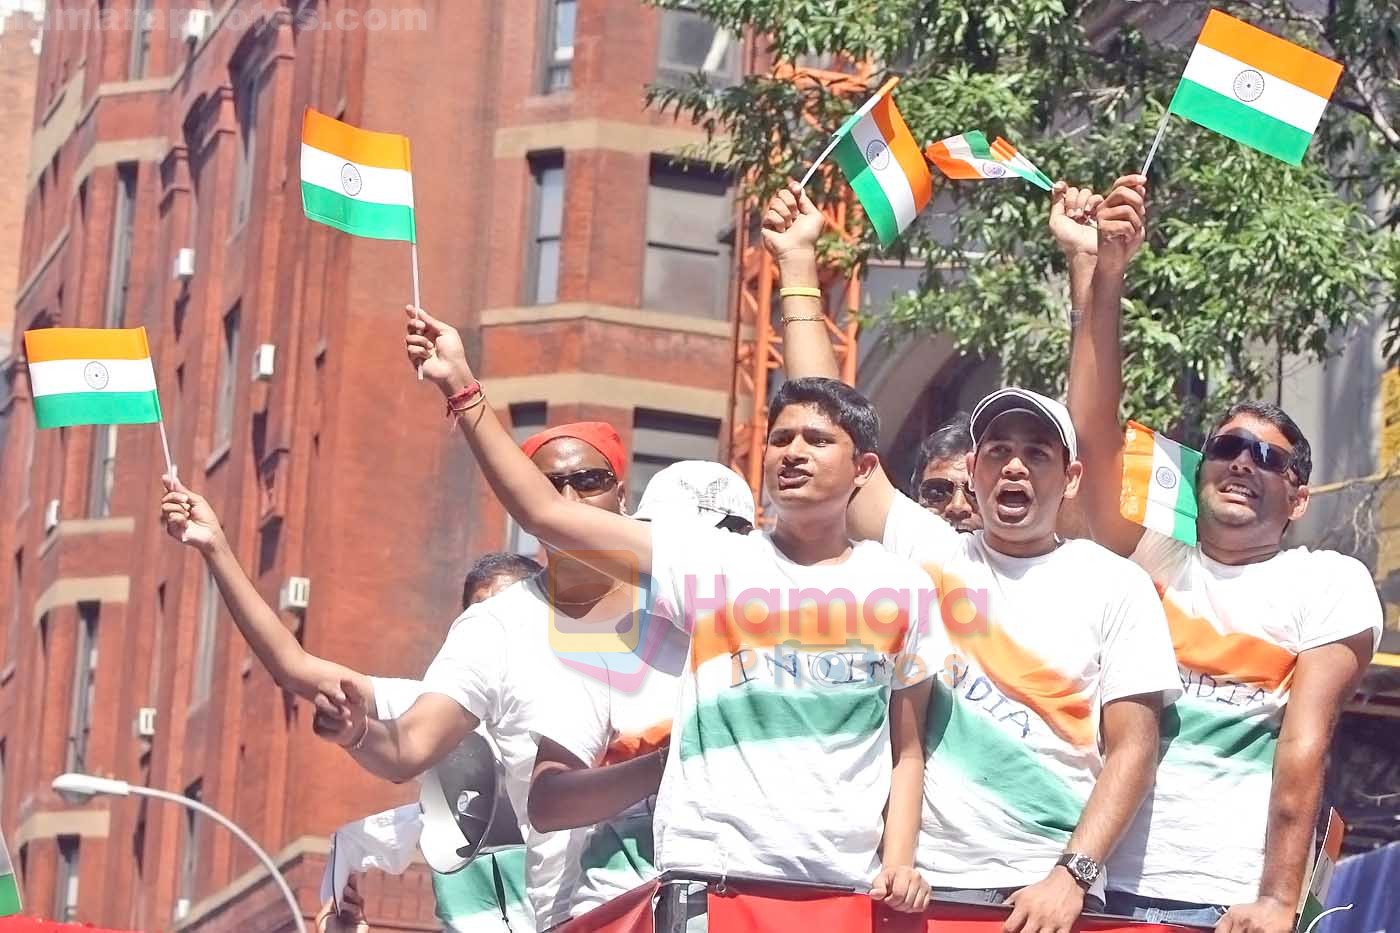 Fans at India Day Parade and Festival in New York on August 16, 2009 in Manhattan, New York 